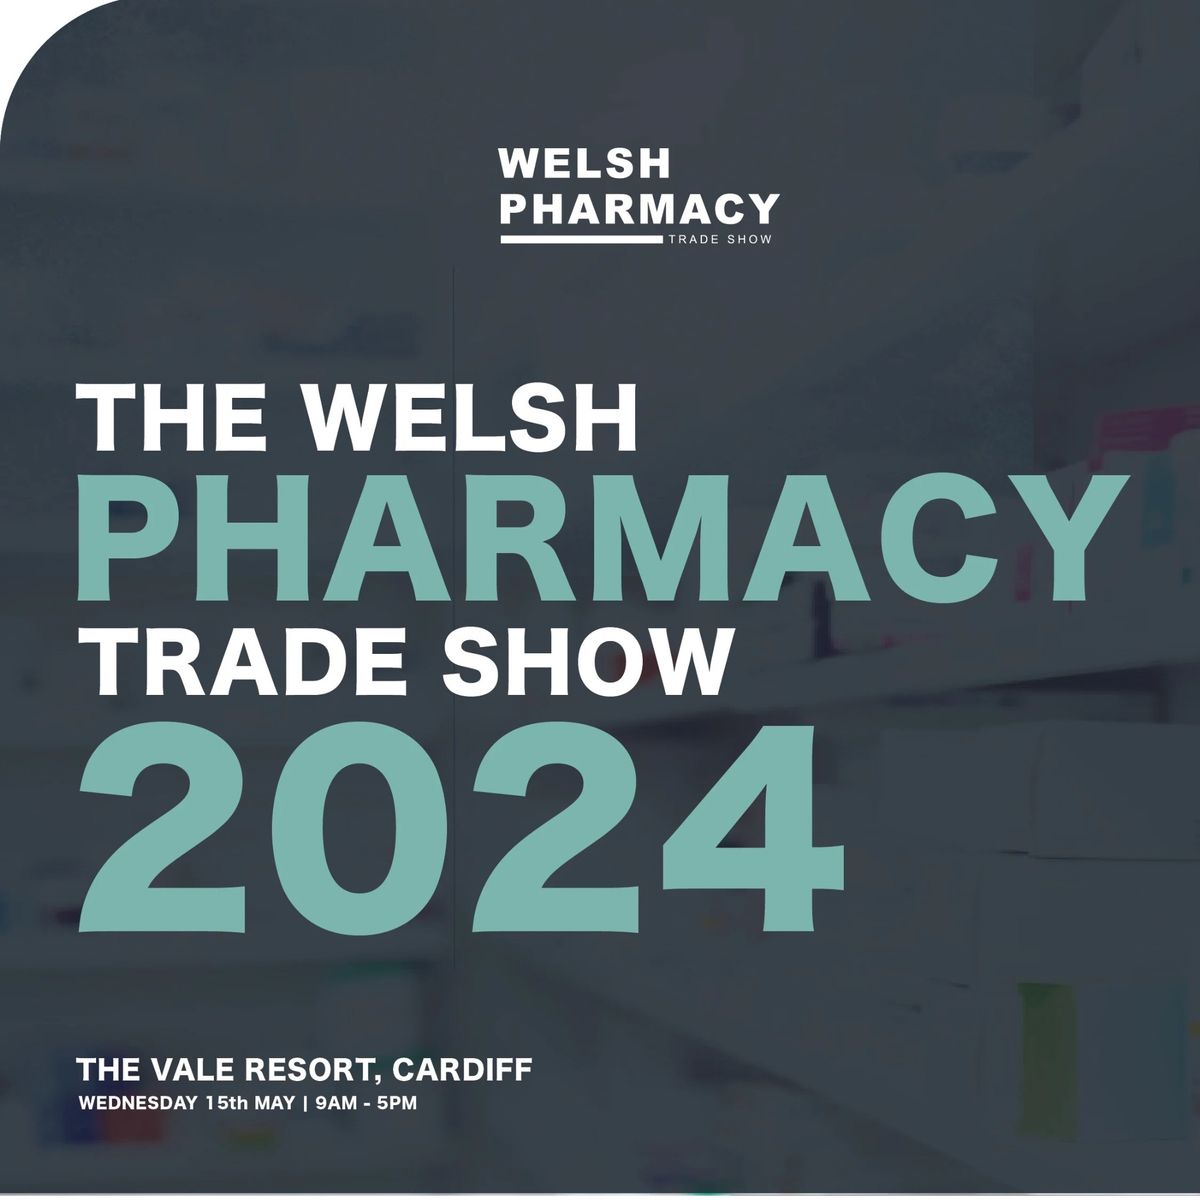 The Welsh Pharmacy Trade Show 2024